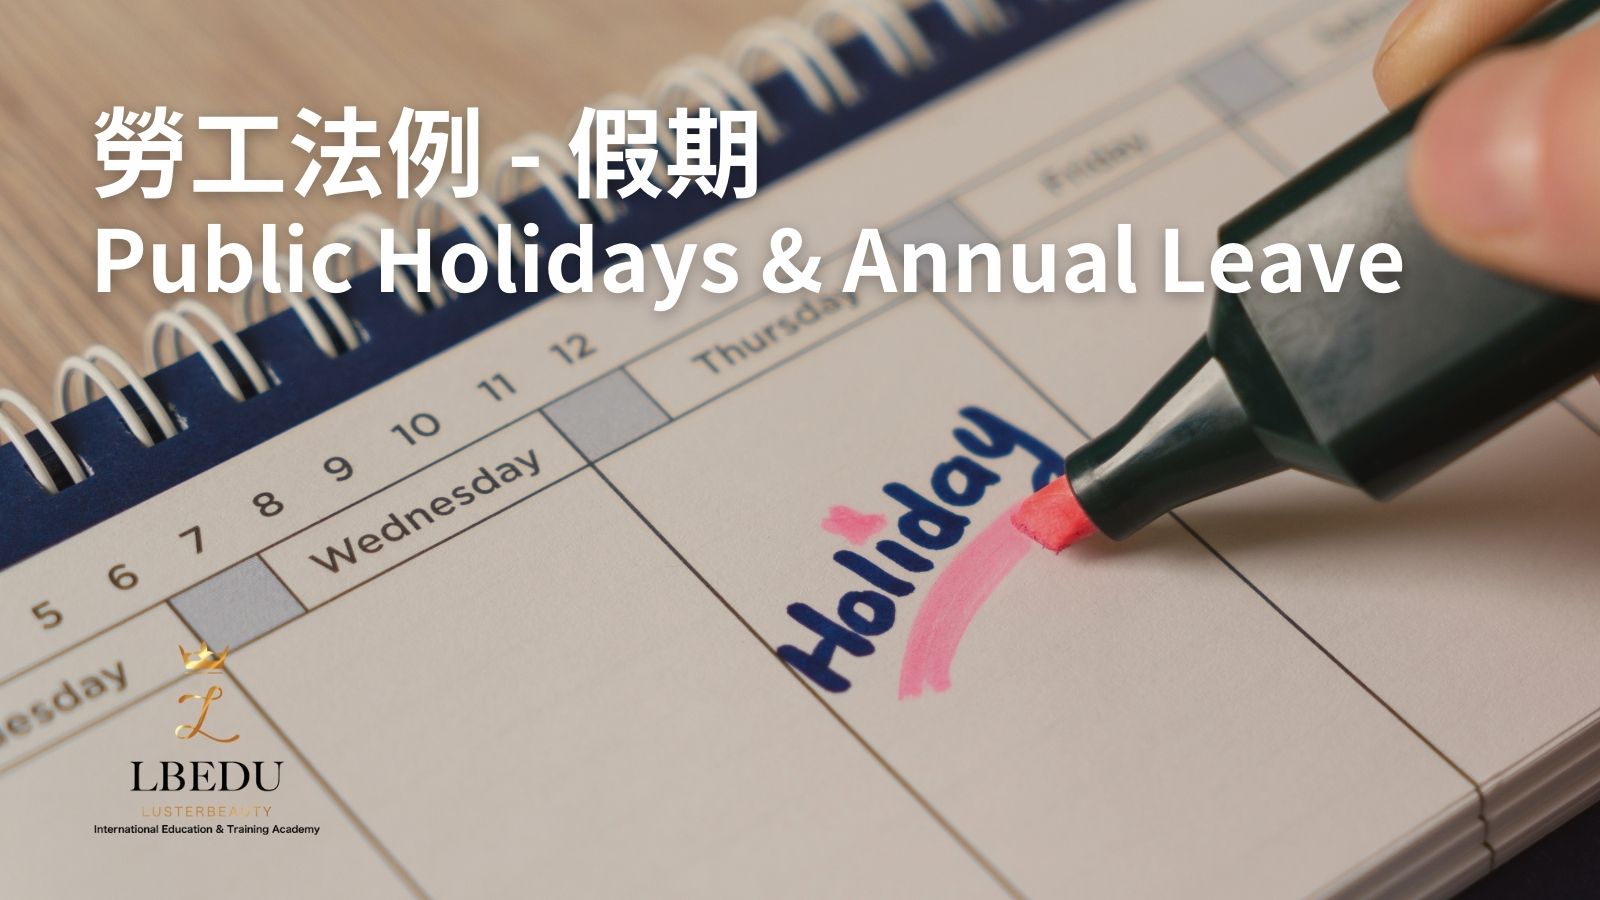 Public Holidays & Annual Leave